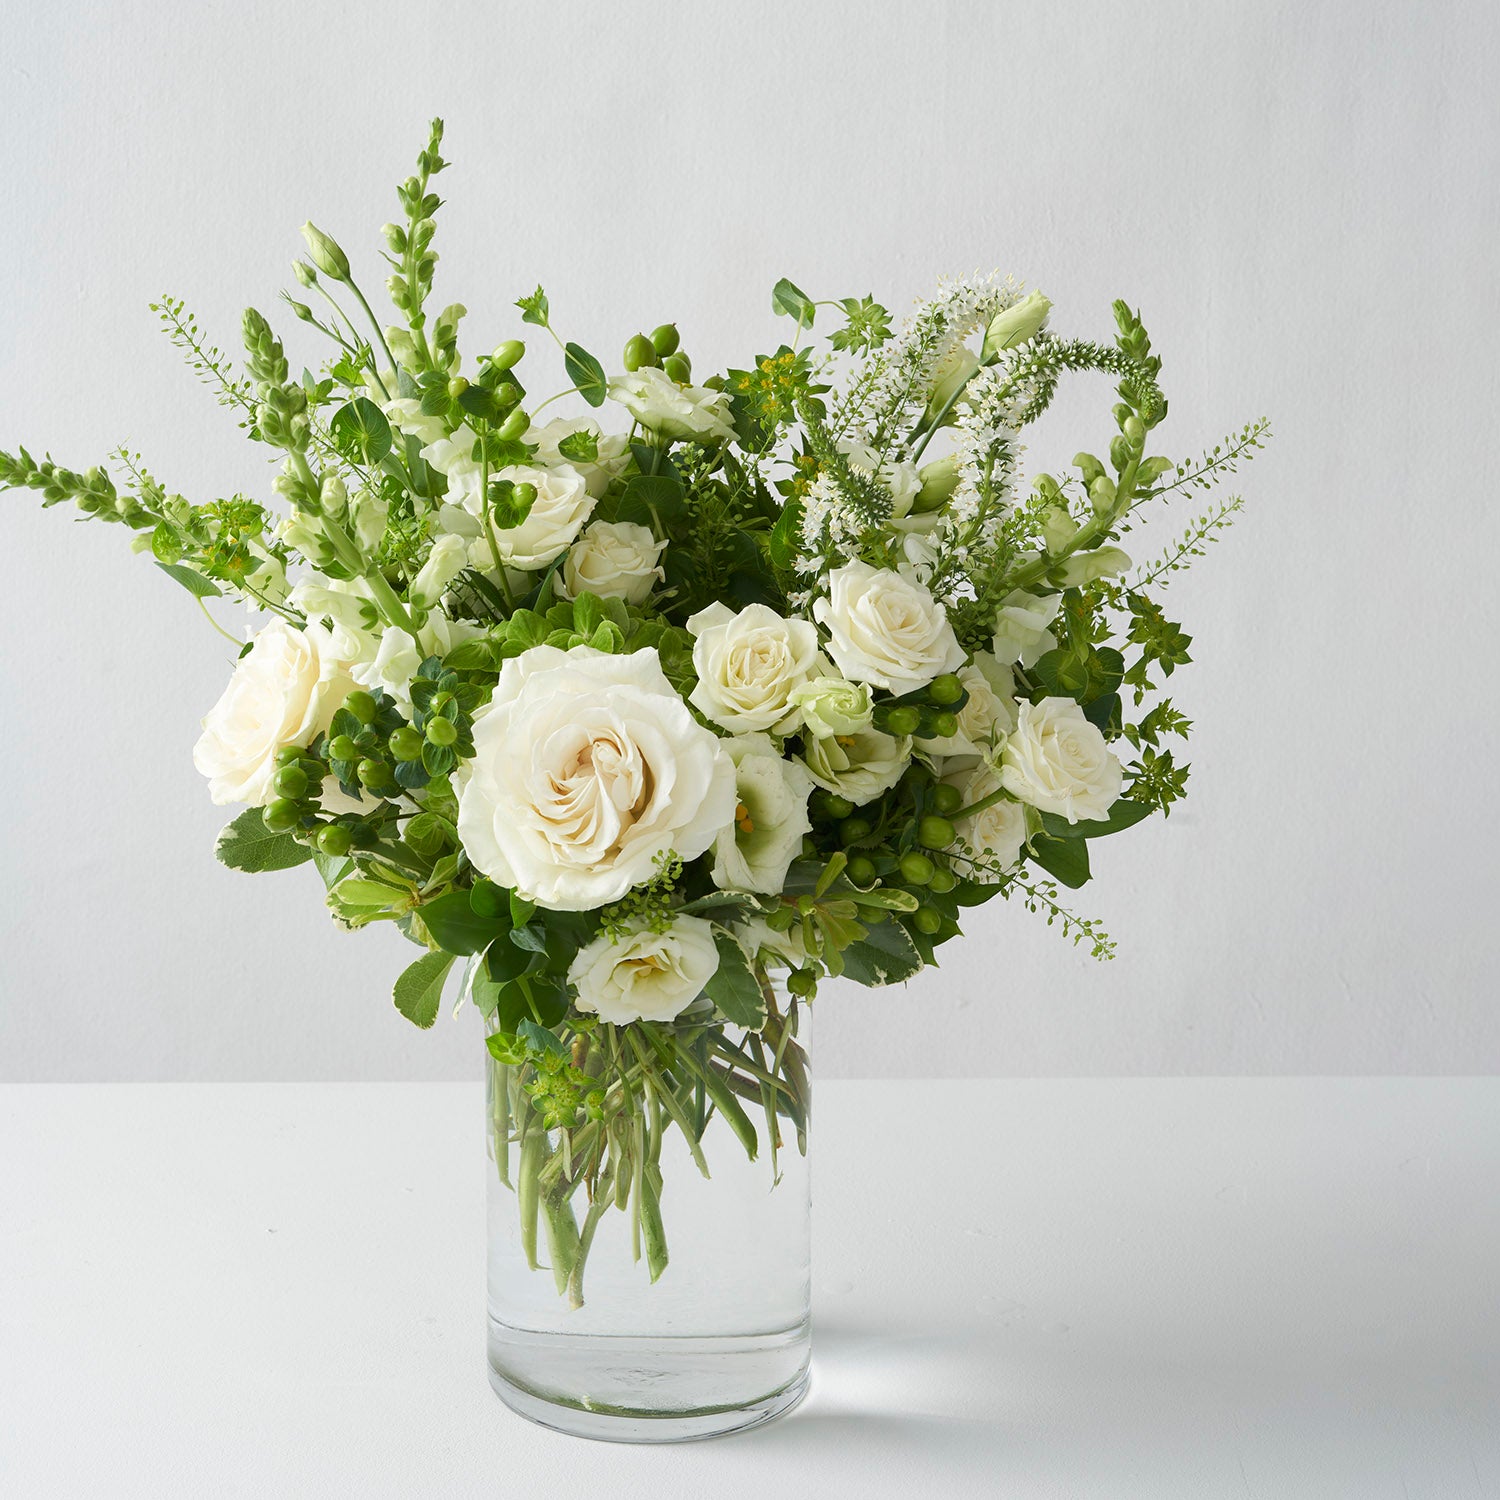 All white and green flowers in glass vase on white background.